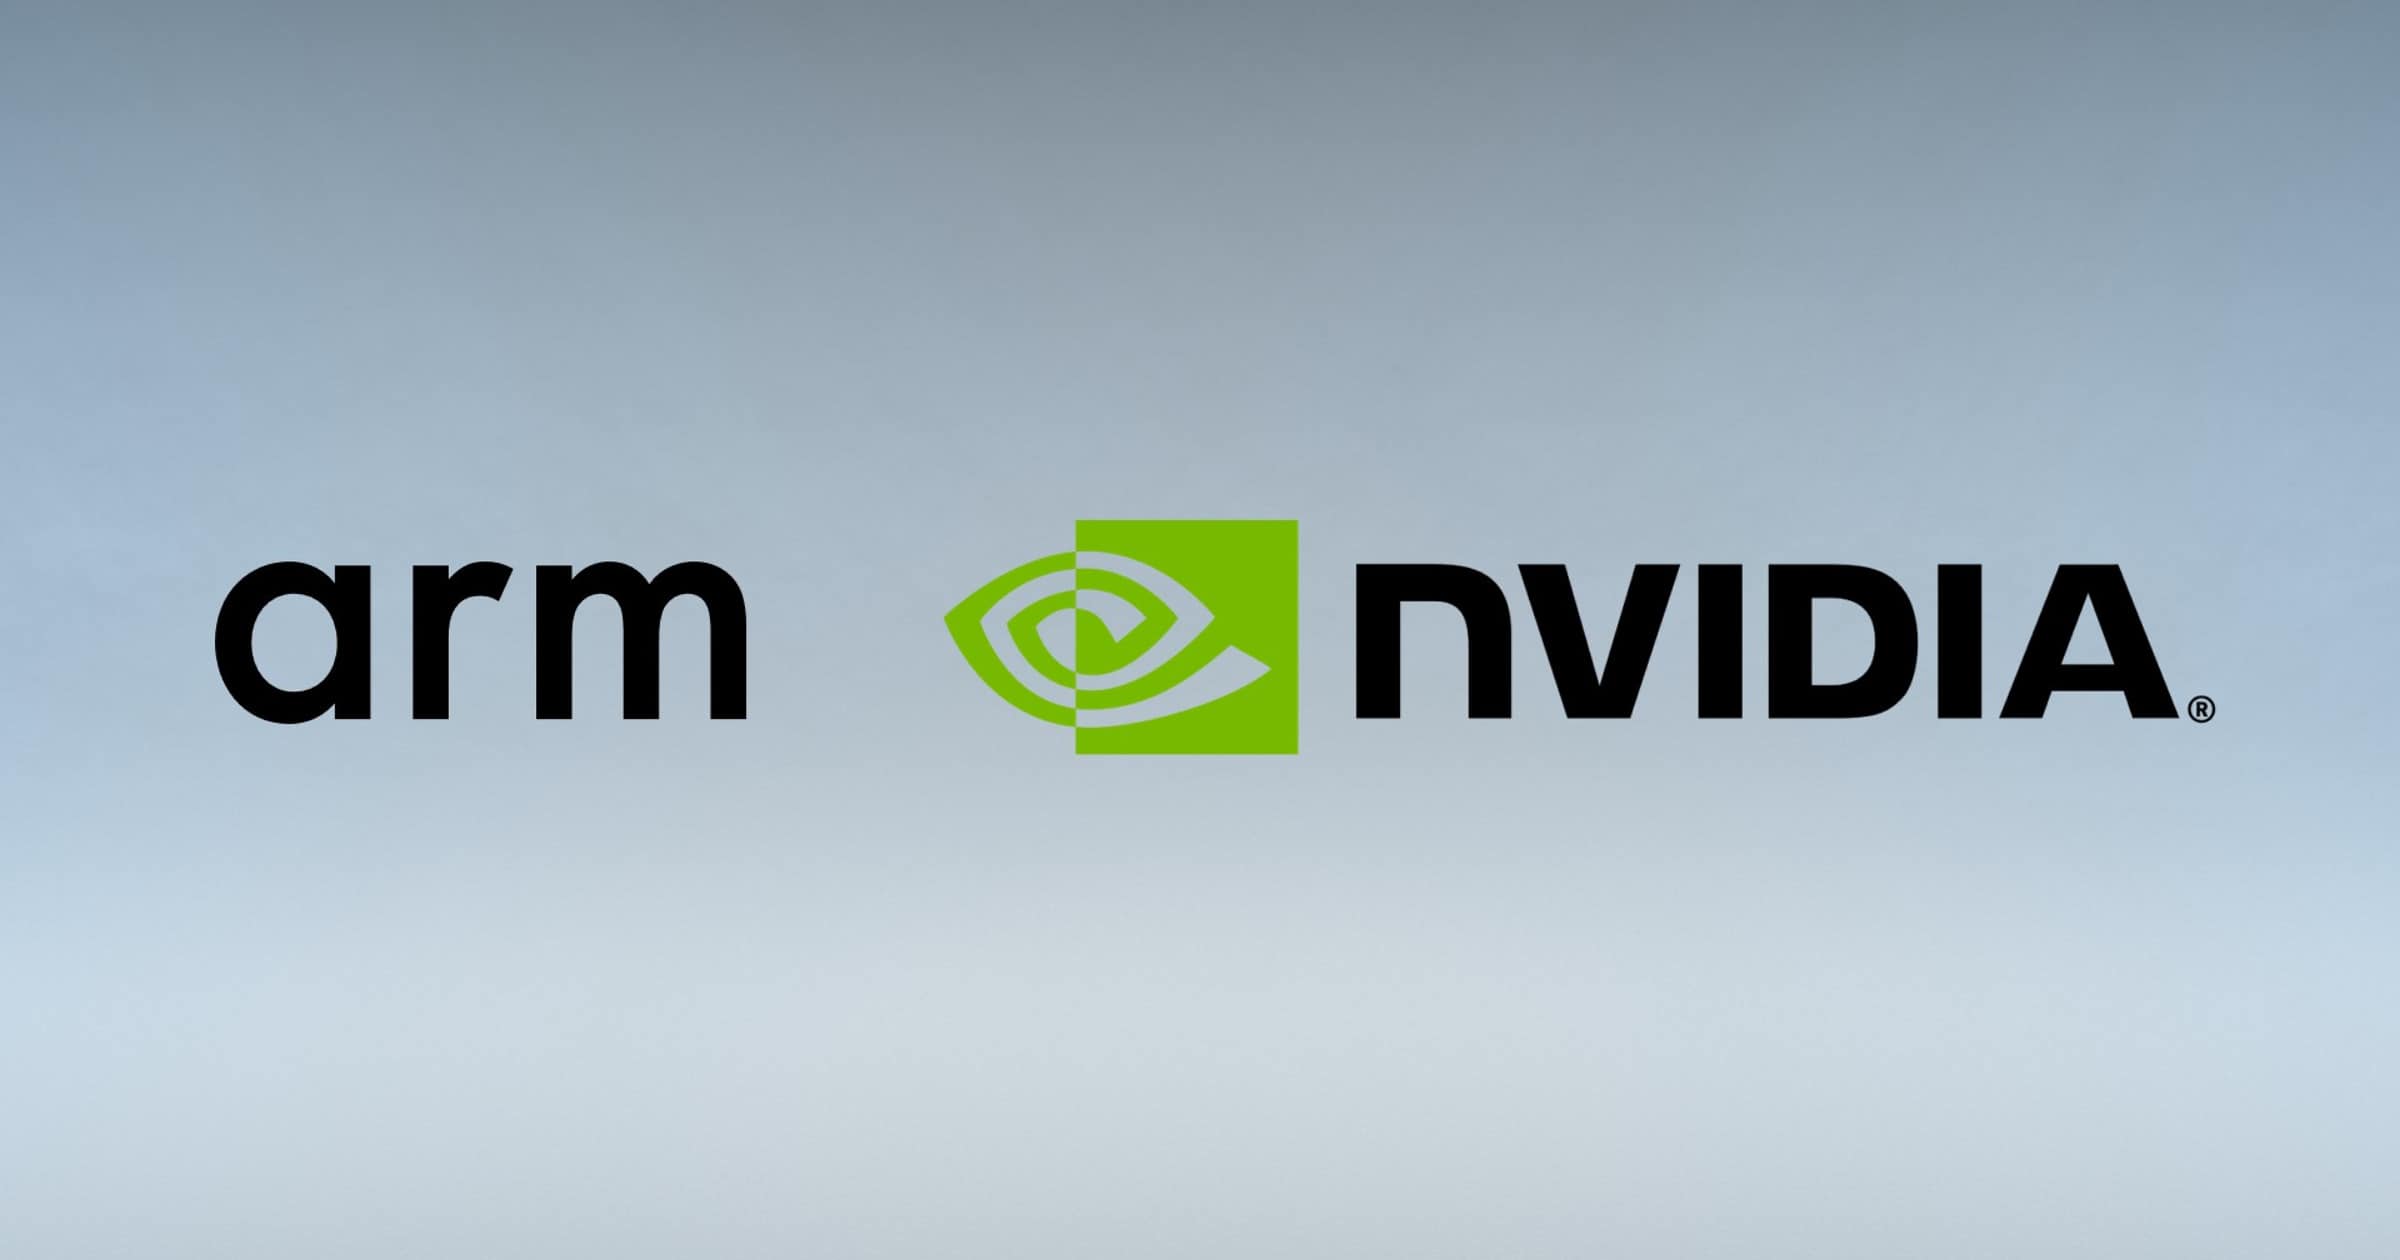 NVIDIA to Purchase Arm in Record-Busting Deal